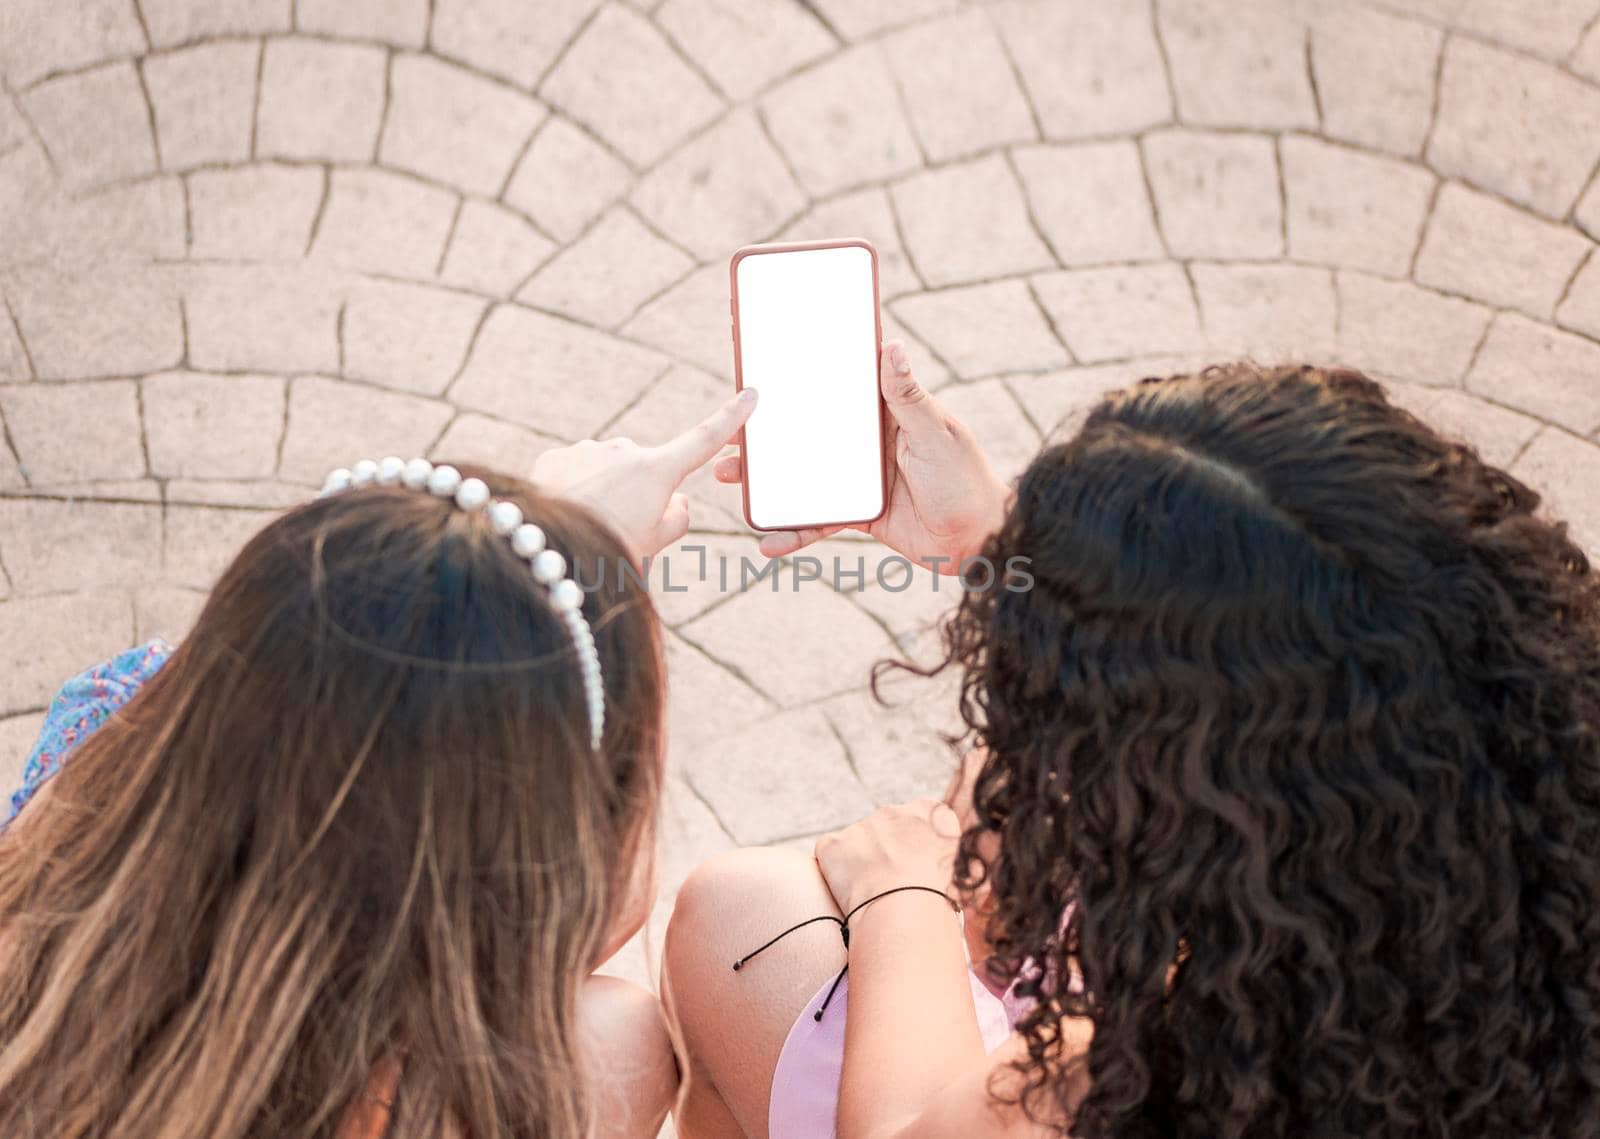 friend showing her cell phone screen, two girls pointing at her cell phone, Girl showing her smartphone to her friend